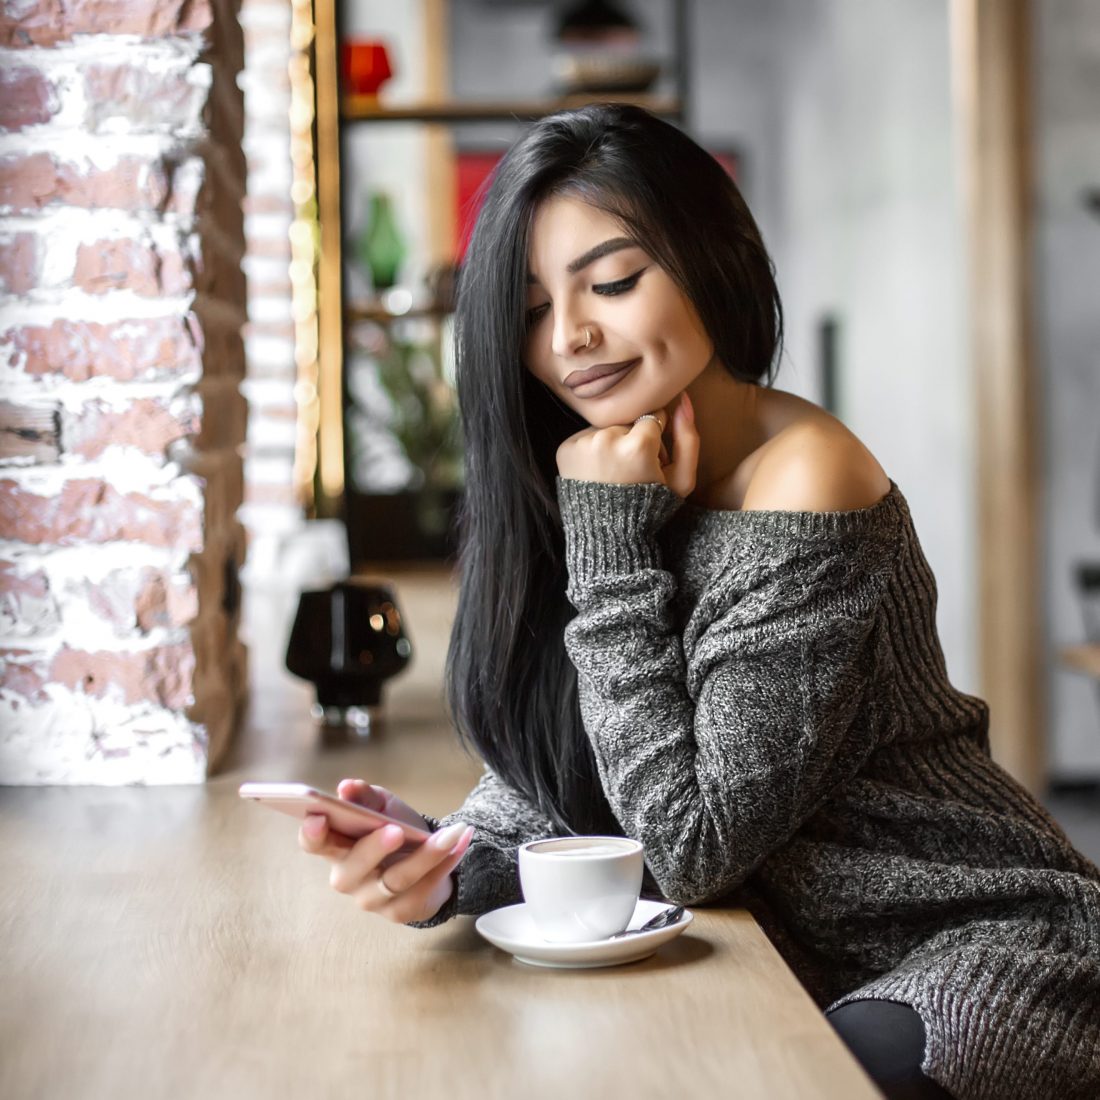 Beautiful girl uses a phone and drinks coffee, sitting in a cozy